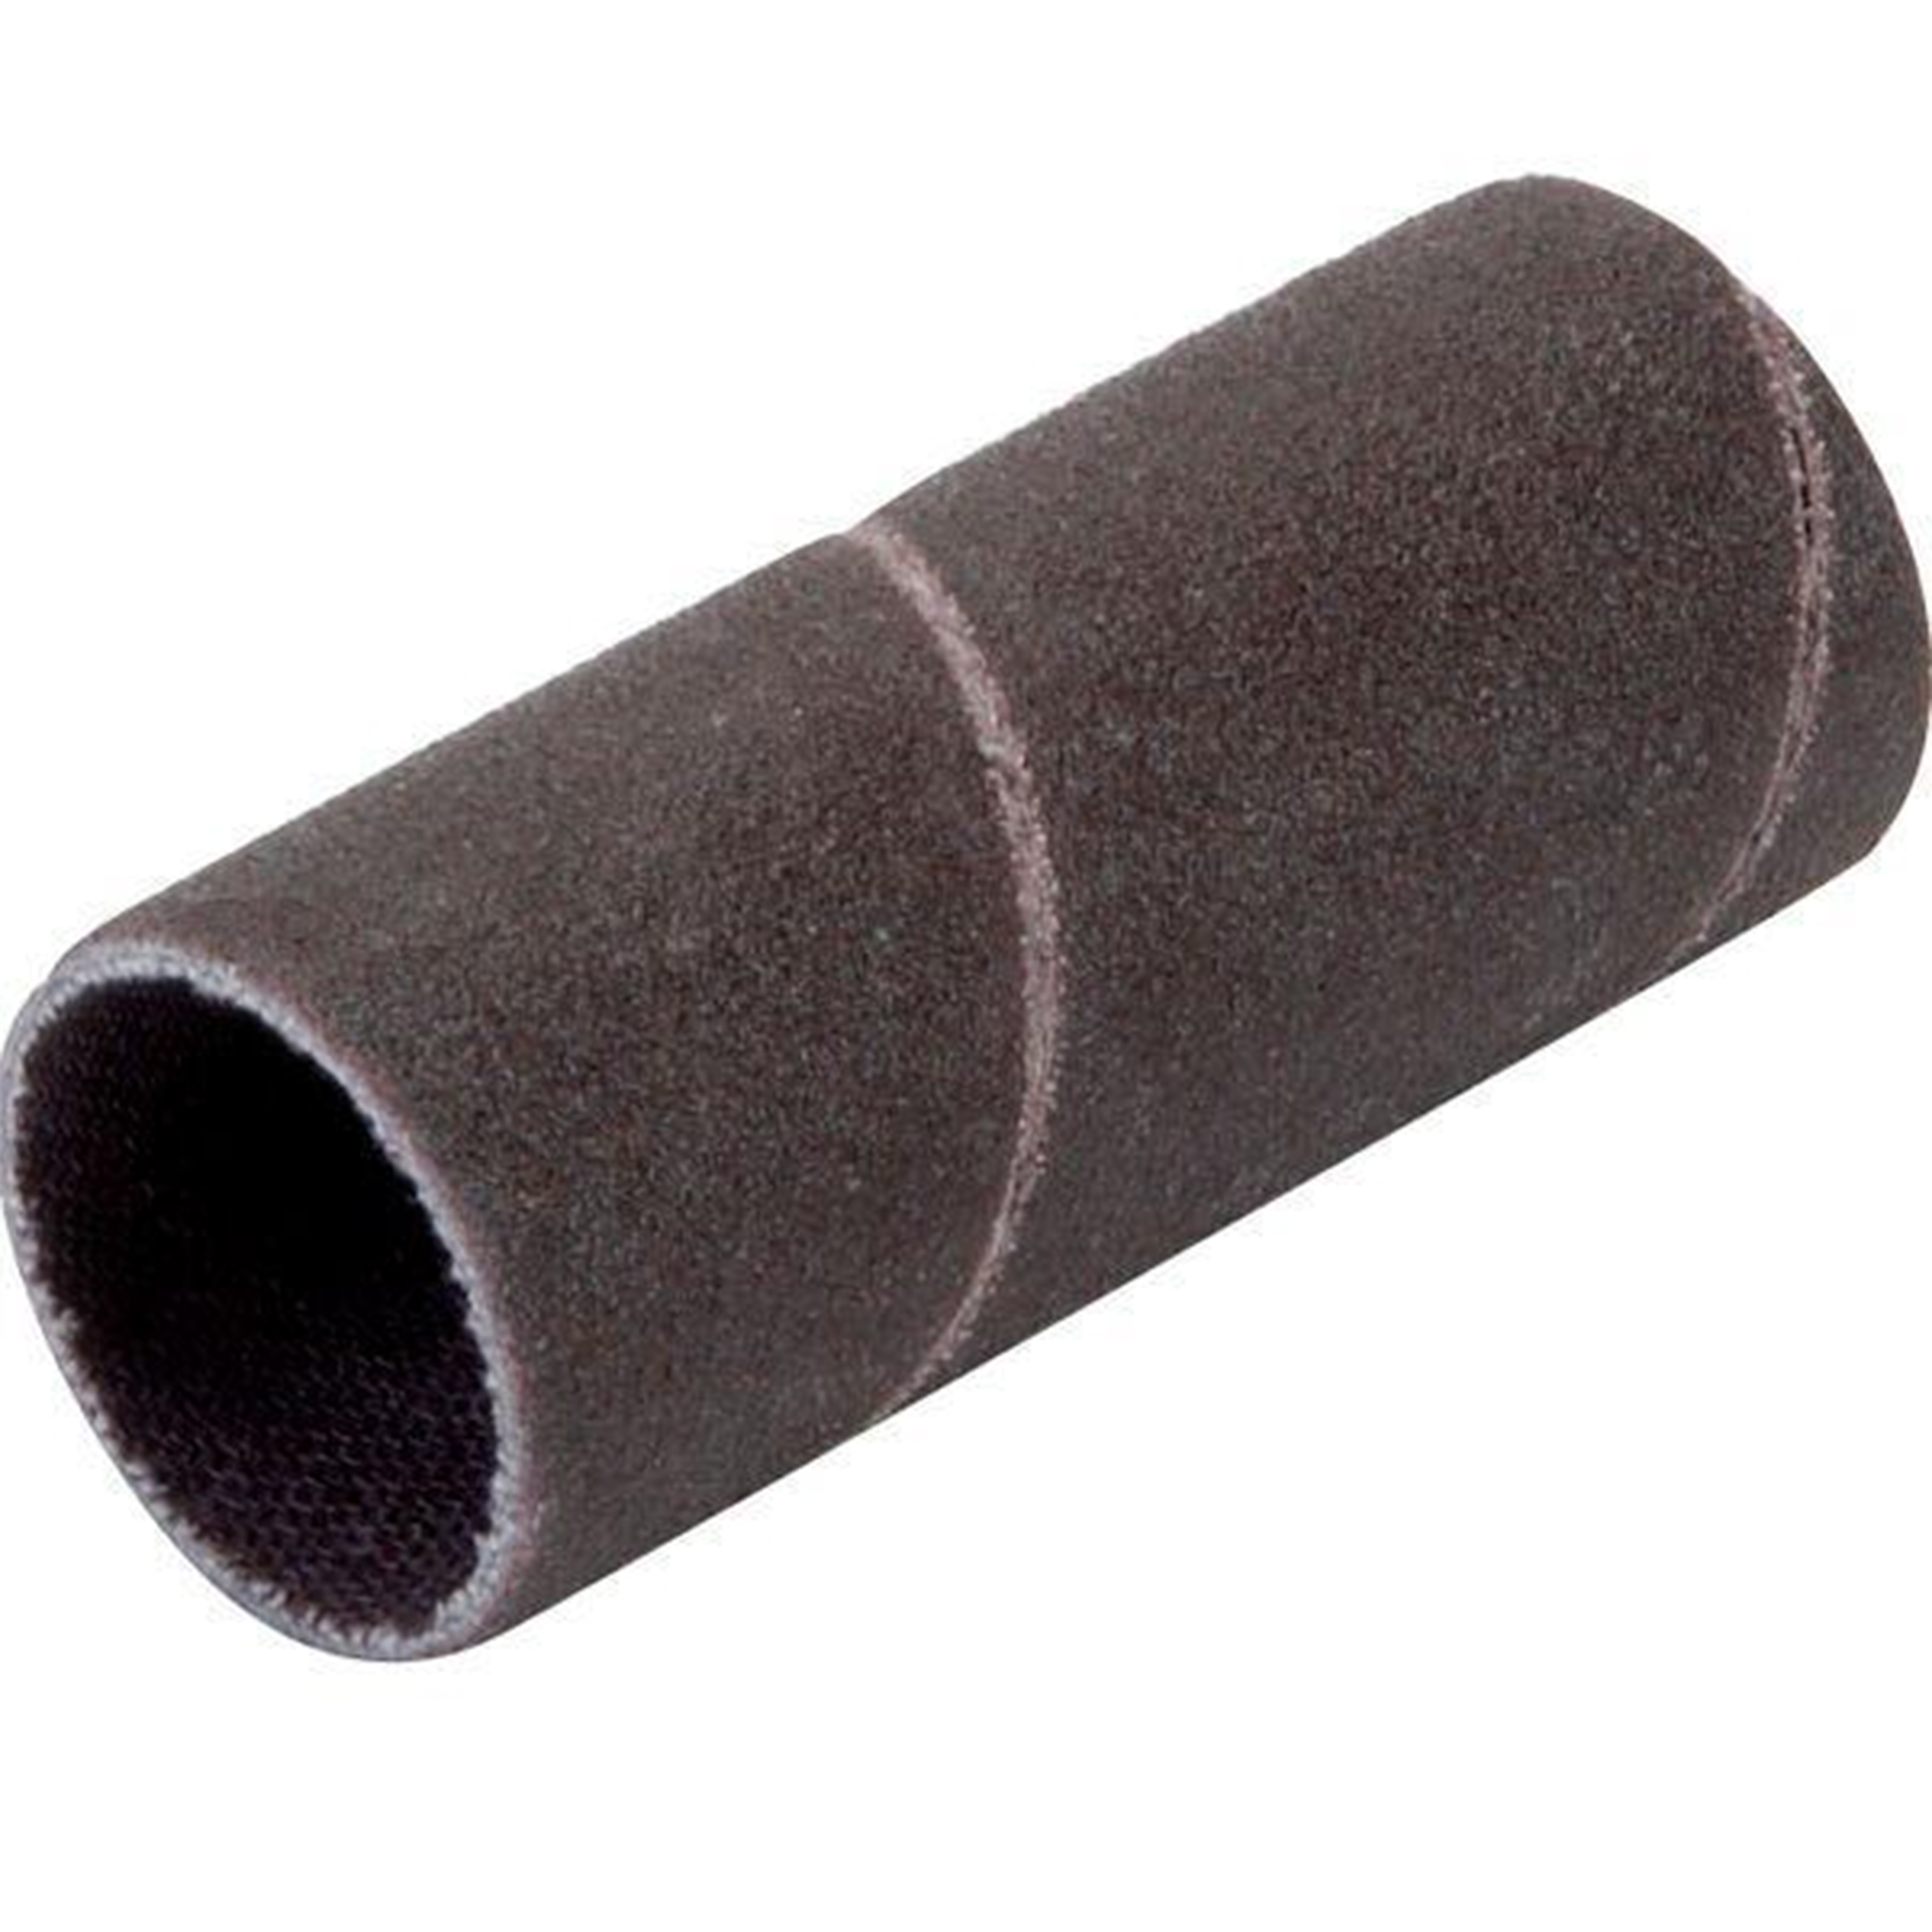 Sanding Drum Replacement Sleeve, 3/4" Dia. X 2" Length, 80 Grit, 12 Pack